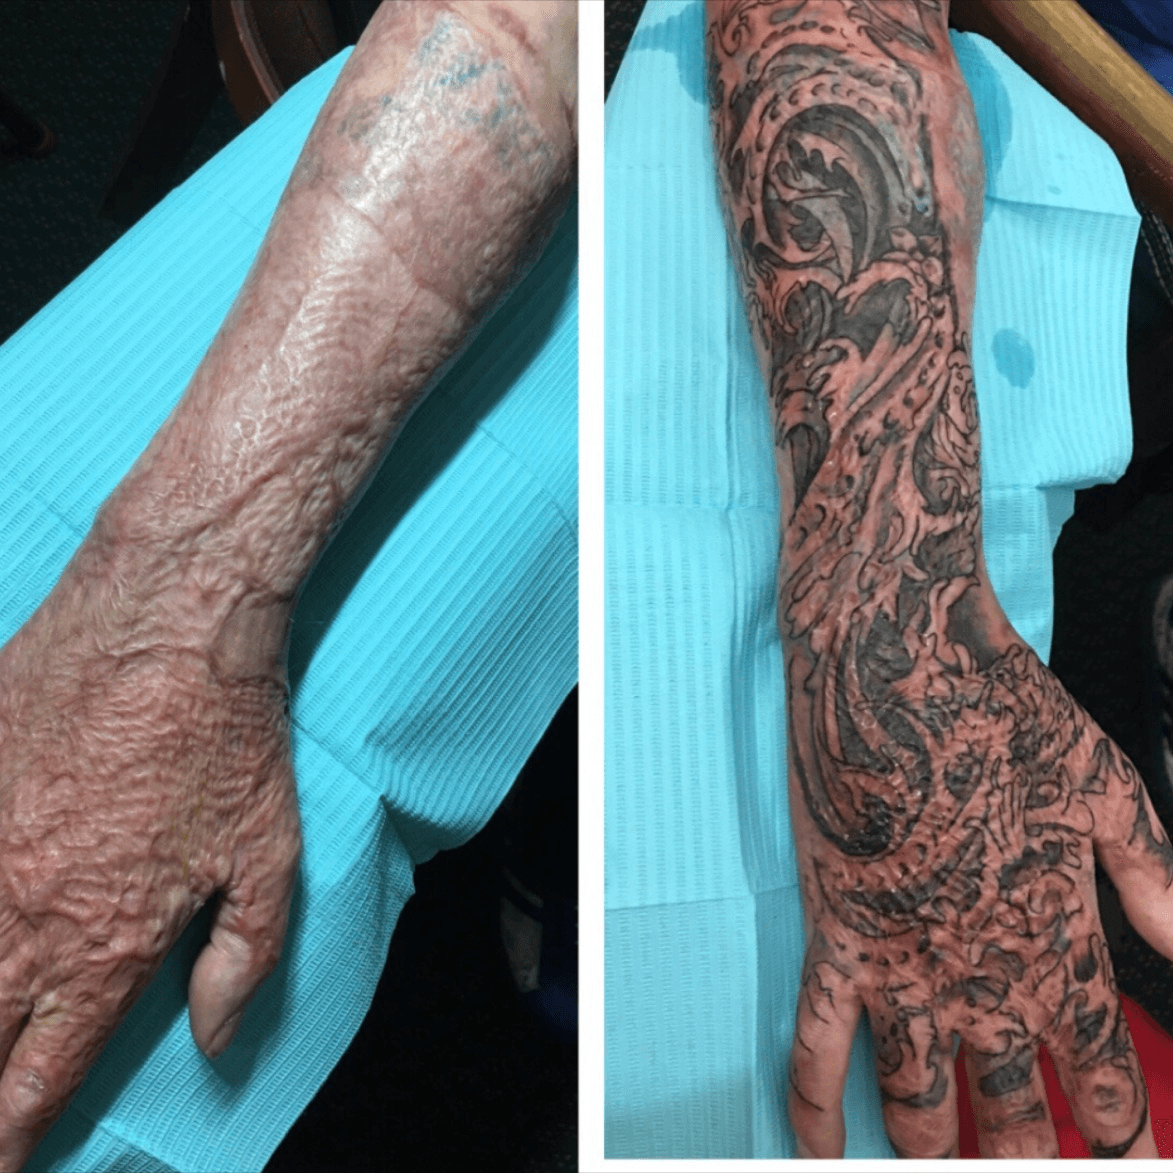 Photo of Bright Underskin Tattoo on Burned Hand Sparks Online Controversy